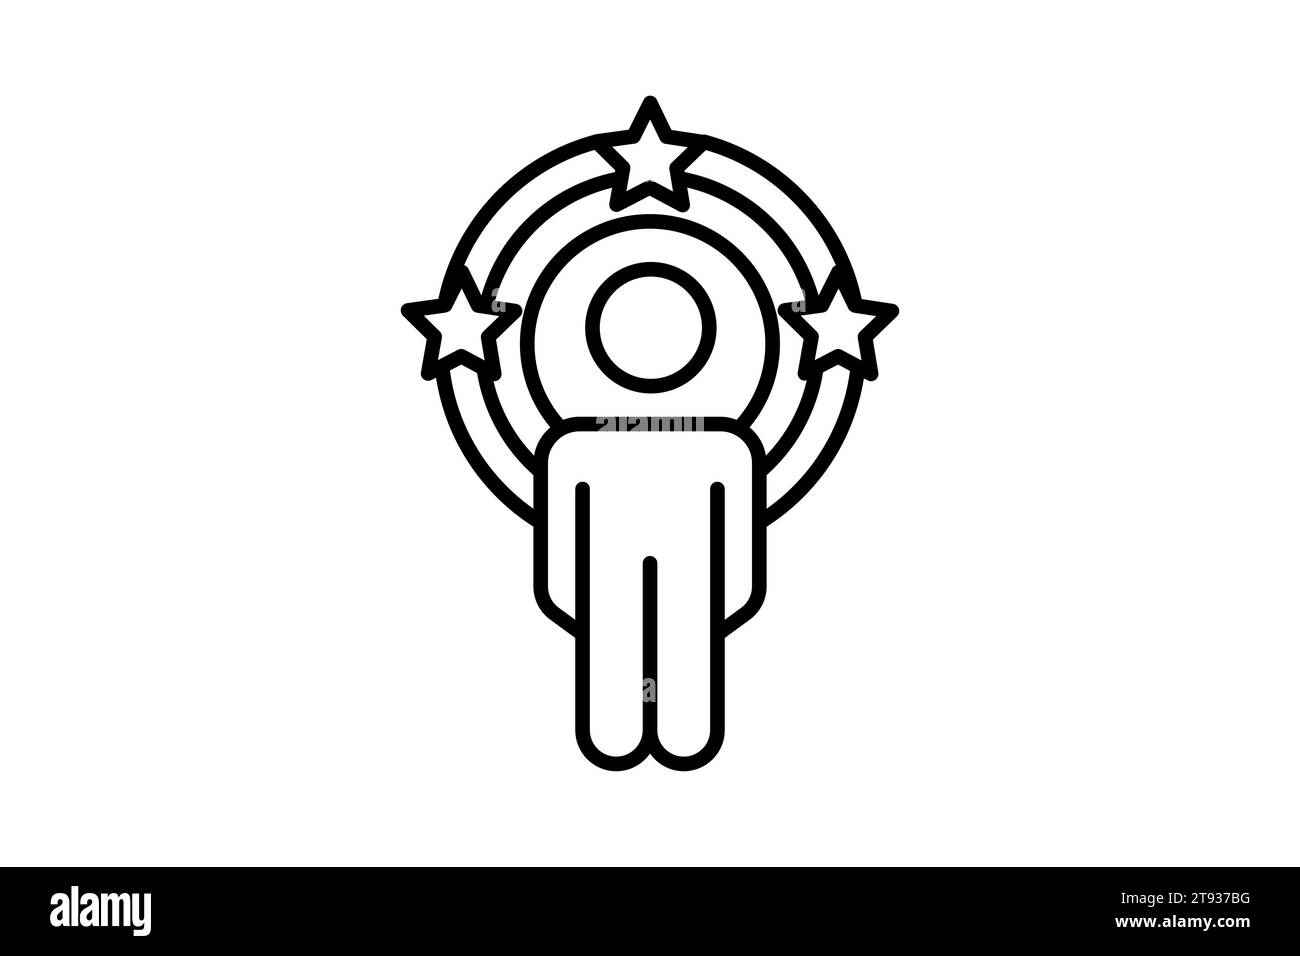 influencer icon. human in circle and star. line icon style. simple vector design editable Stock Vector